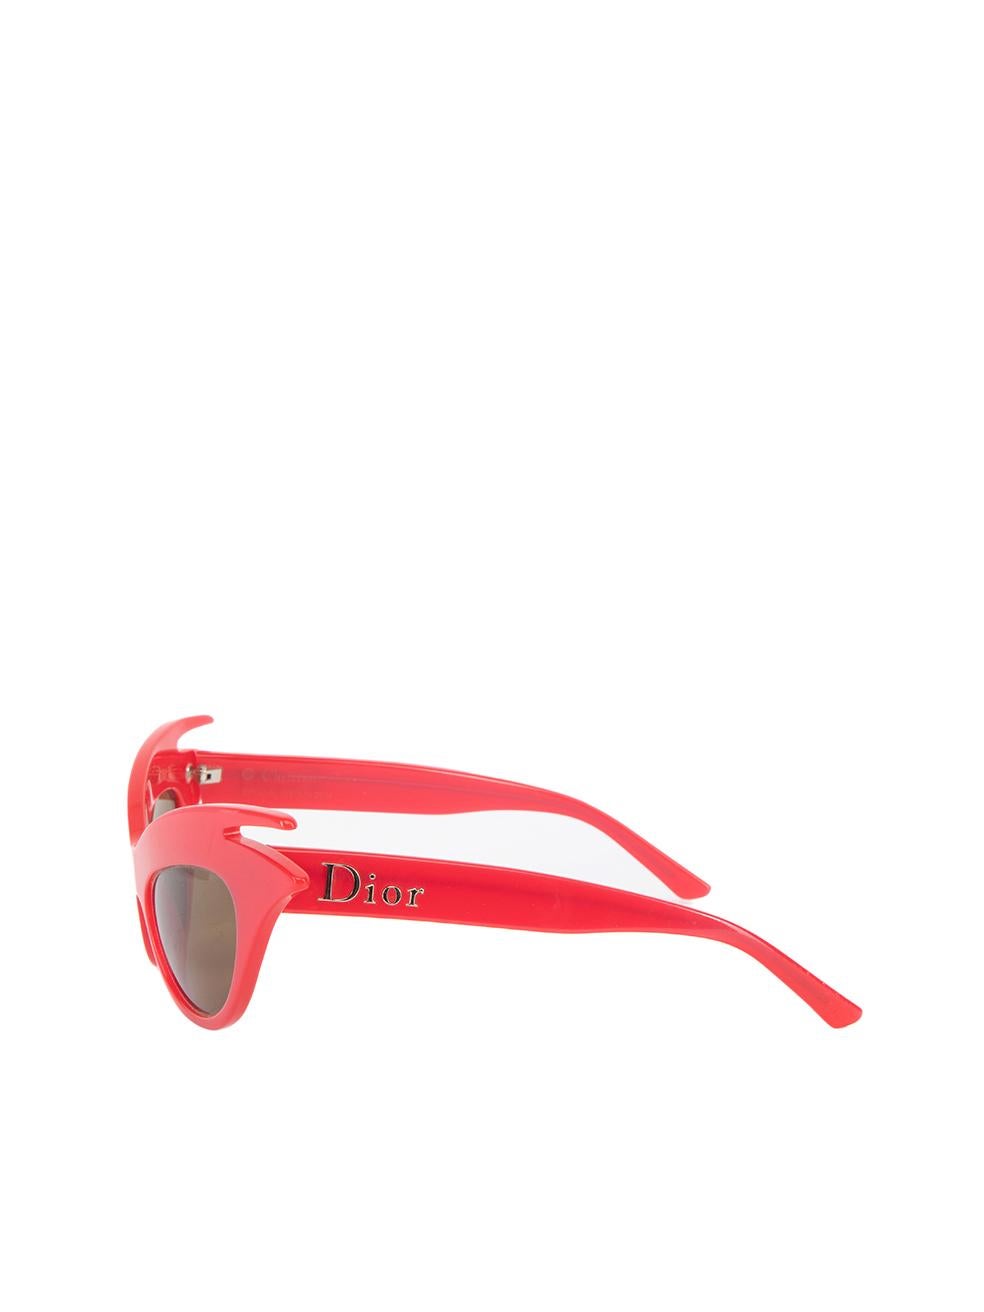 Pre-Loved Dior Women's Miss Dior Cherie Limited Edition Red Cat Eye Sunglasses 1